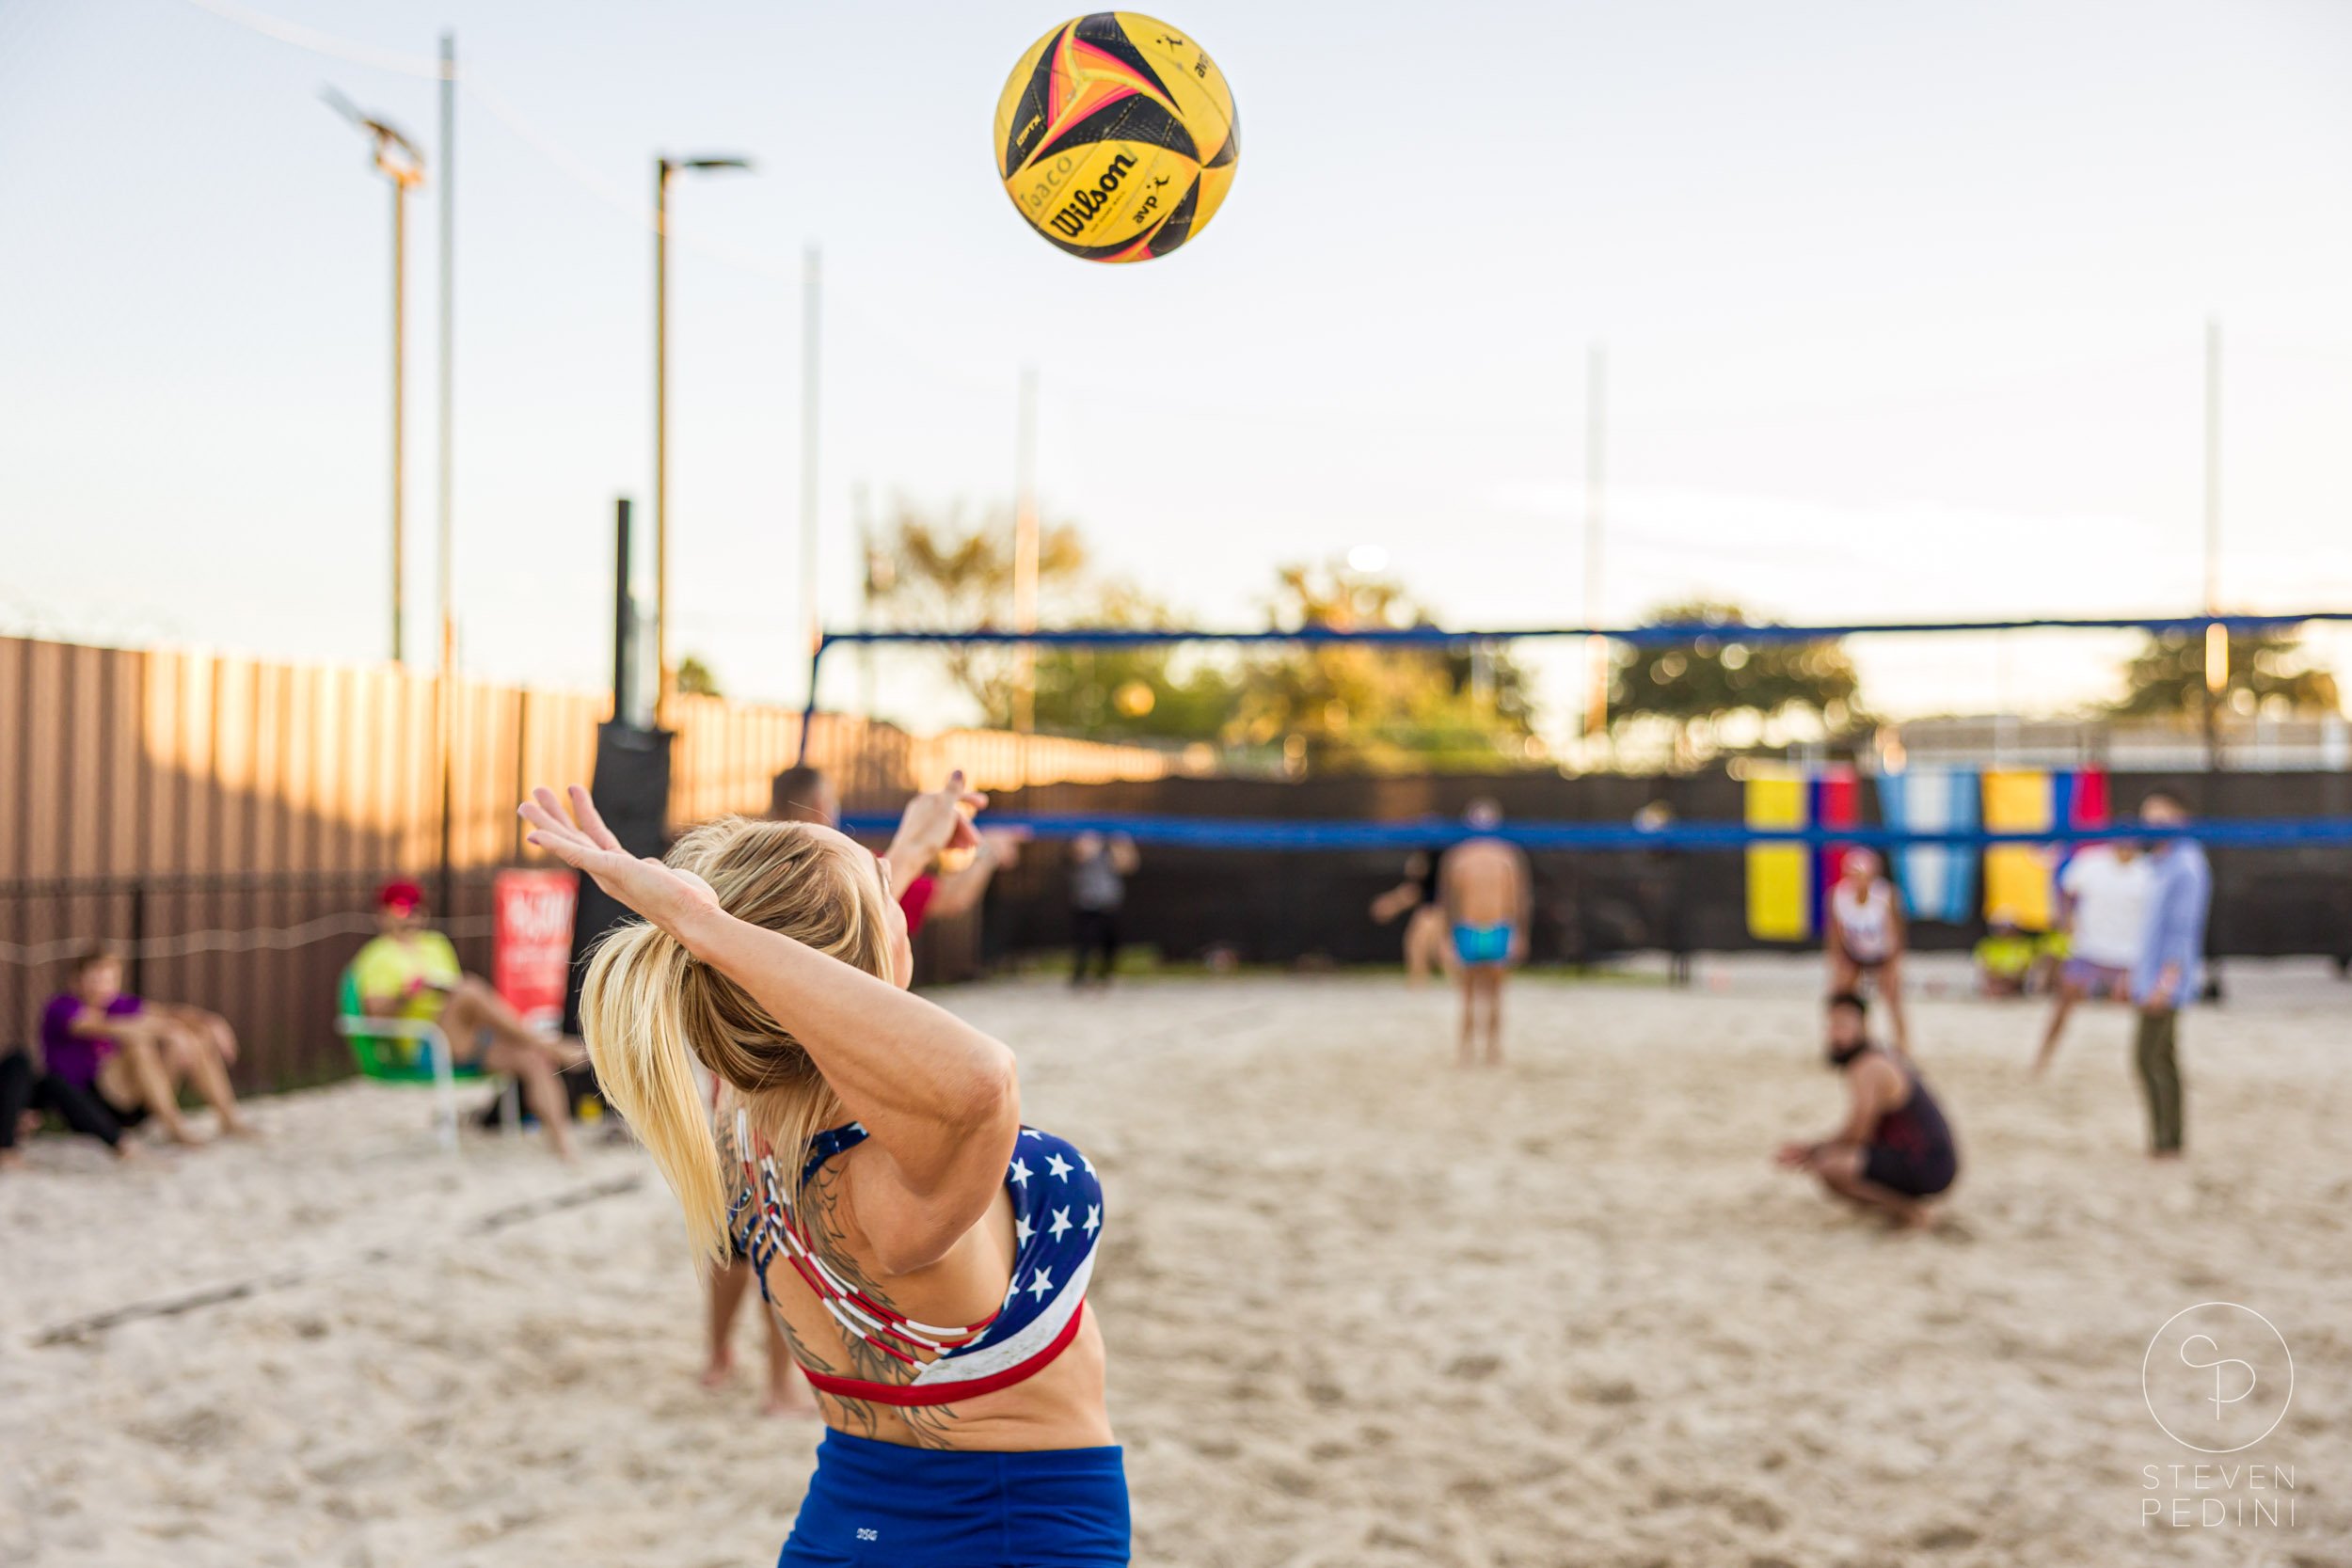 Steven Pedini Photography - Bumpy Pickle - Sand Volleyball - Houston TX - World Cup of Volleyball - 00193.jpg